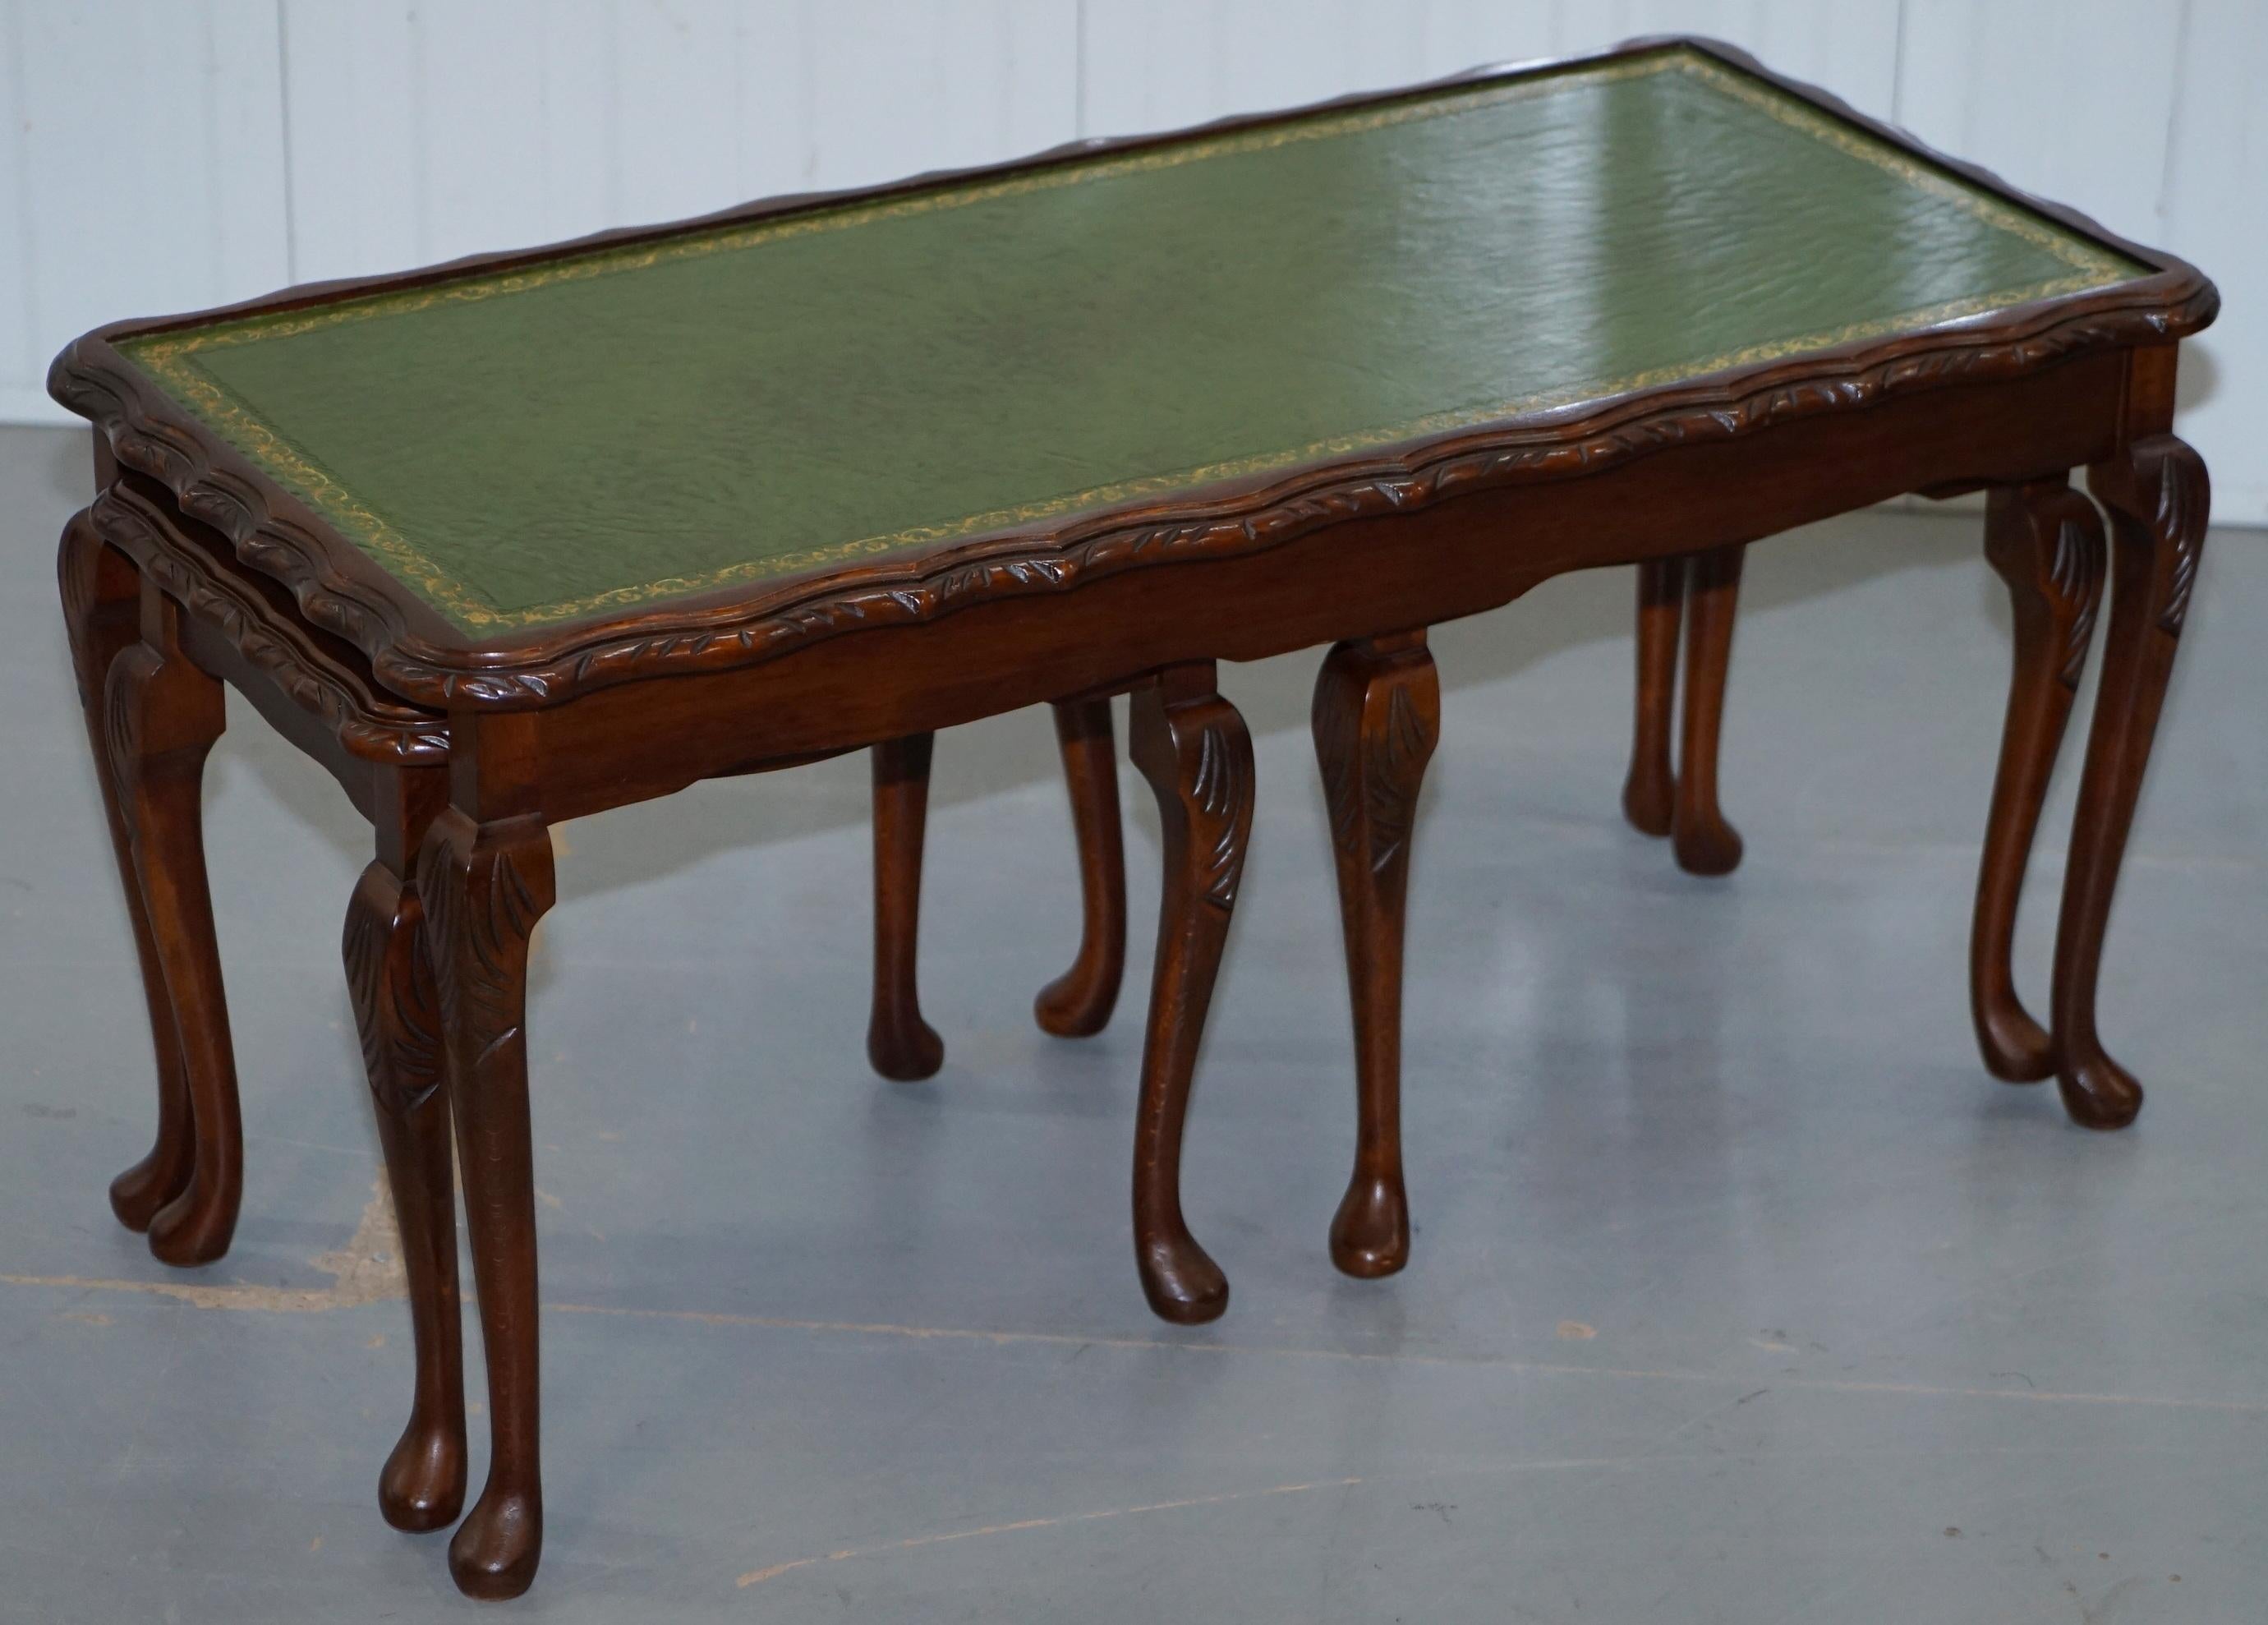 We are delighted to offer for sale this very nicely made Mahogany round table with green leather top which recess two small nesting side tables

This is a very functional and decorative piece of furniture, each table has a fully aniline 100%